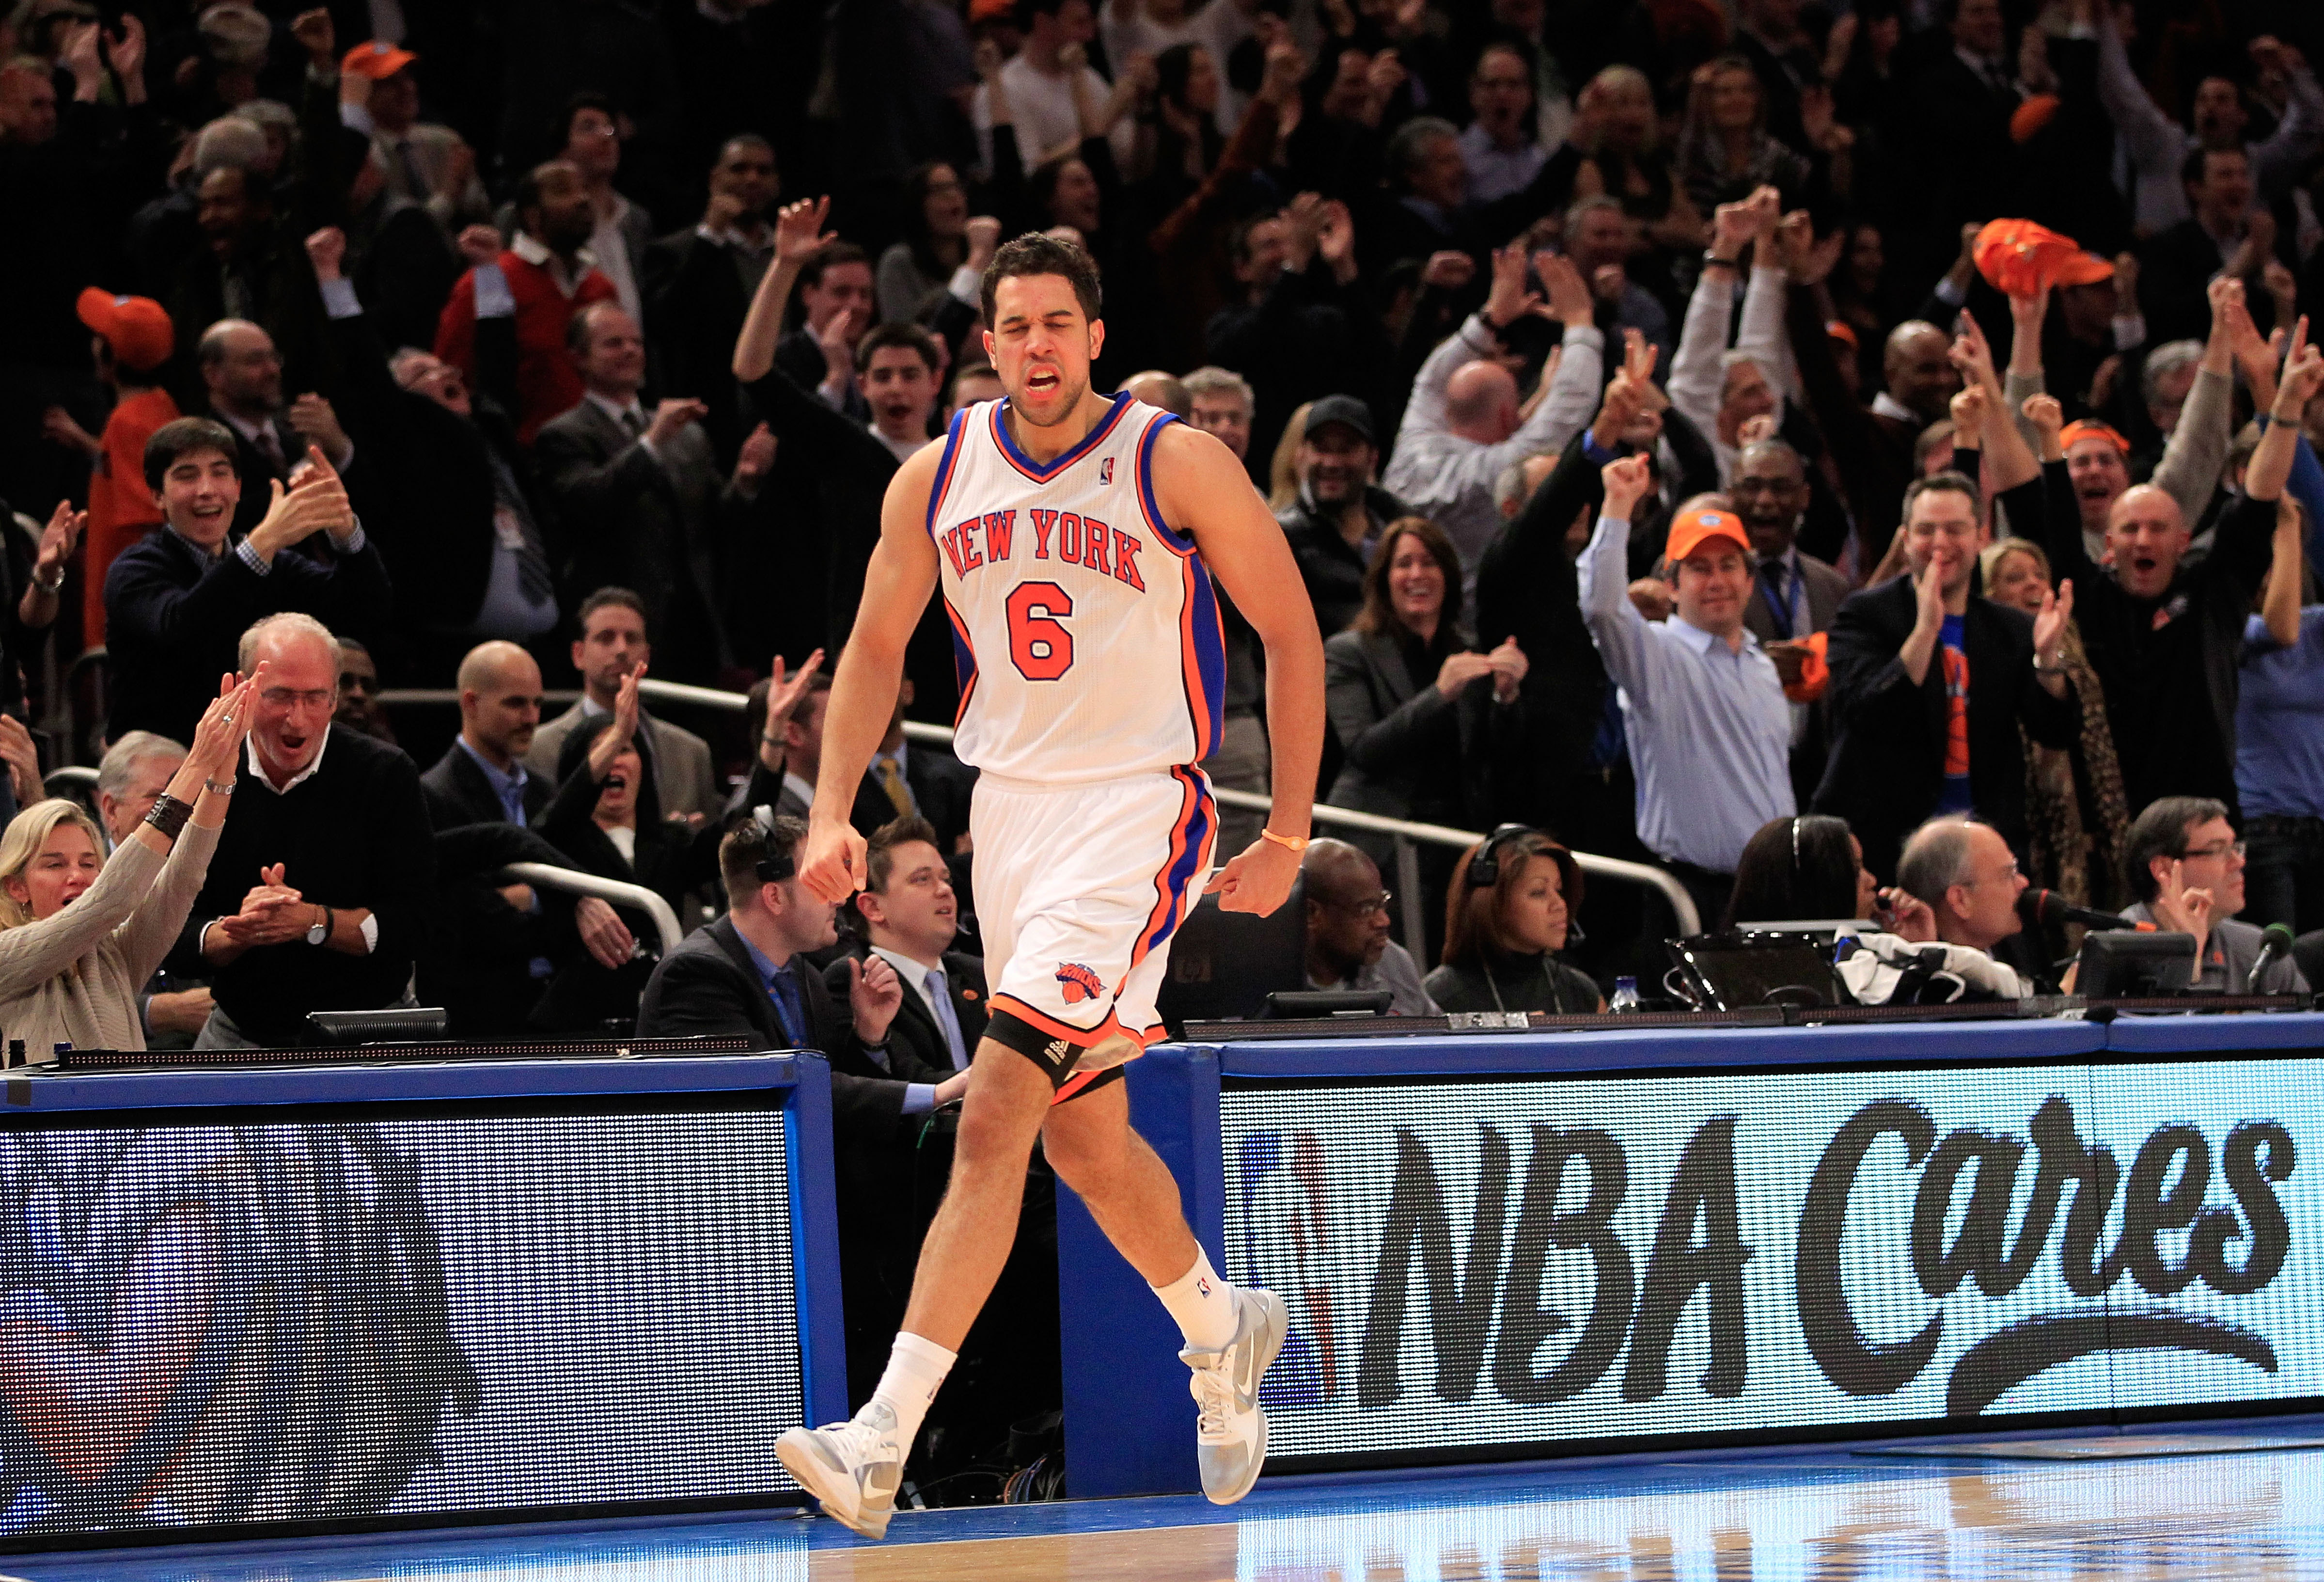 NEW YORK, NY - JANUARY 27: Landry Fields #6 of the New York Knicks celebrates scoring a three pointer against the Miami Heat at Madison Square Garden on January 27, 2011 in New York City. NOTE TO USER: User expressly acknowledges and agrees that, by downl